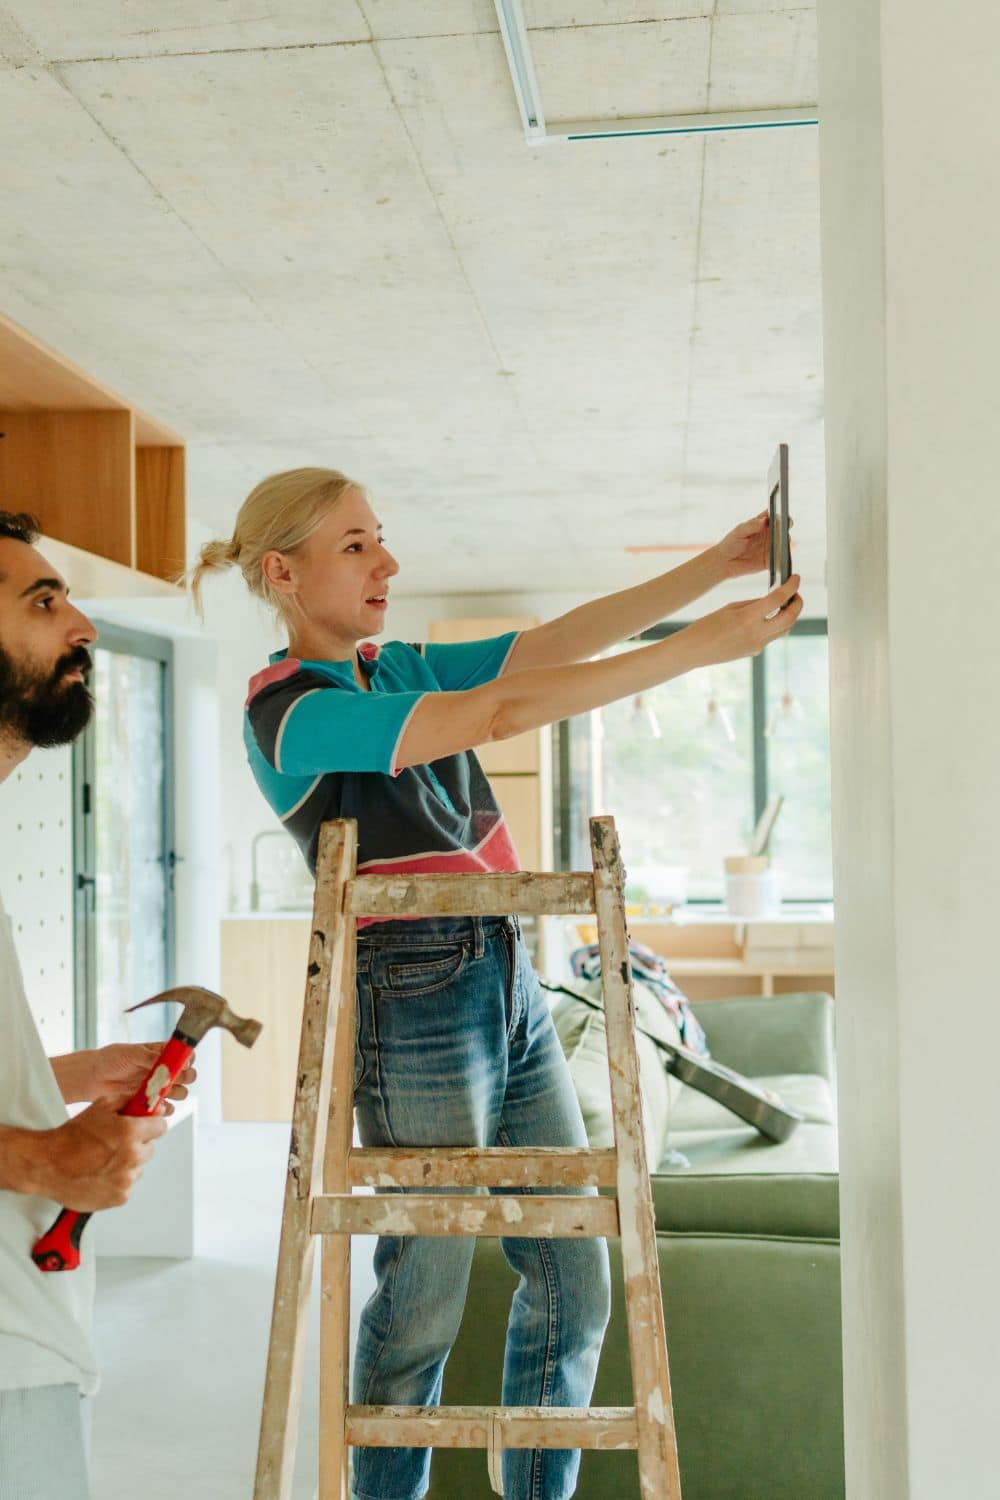 5 Steps To Finish A DIY Project You've Been Putting Off 